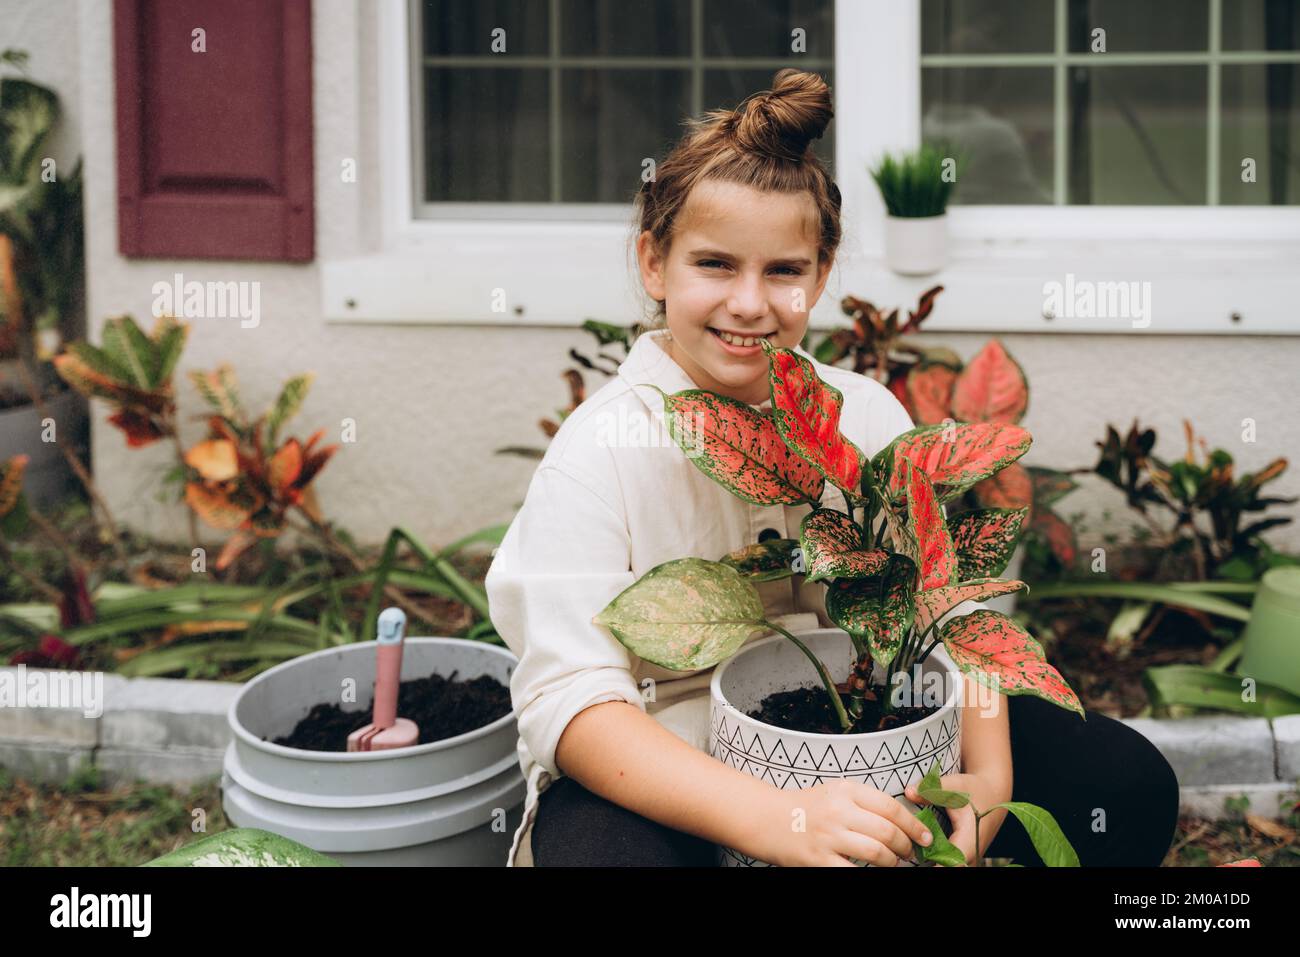 Smiling girl with a plant in a pot Stock Photo